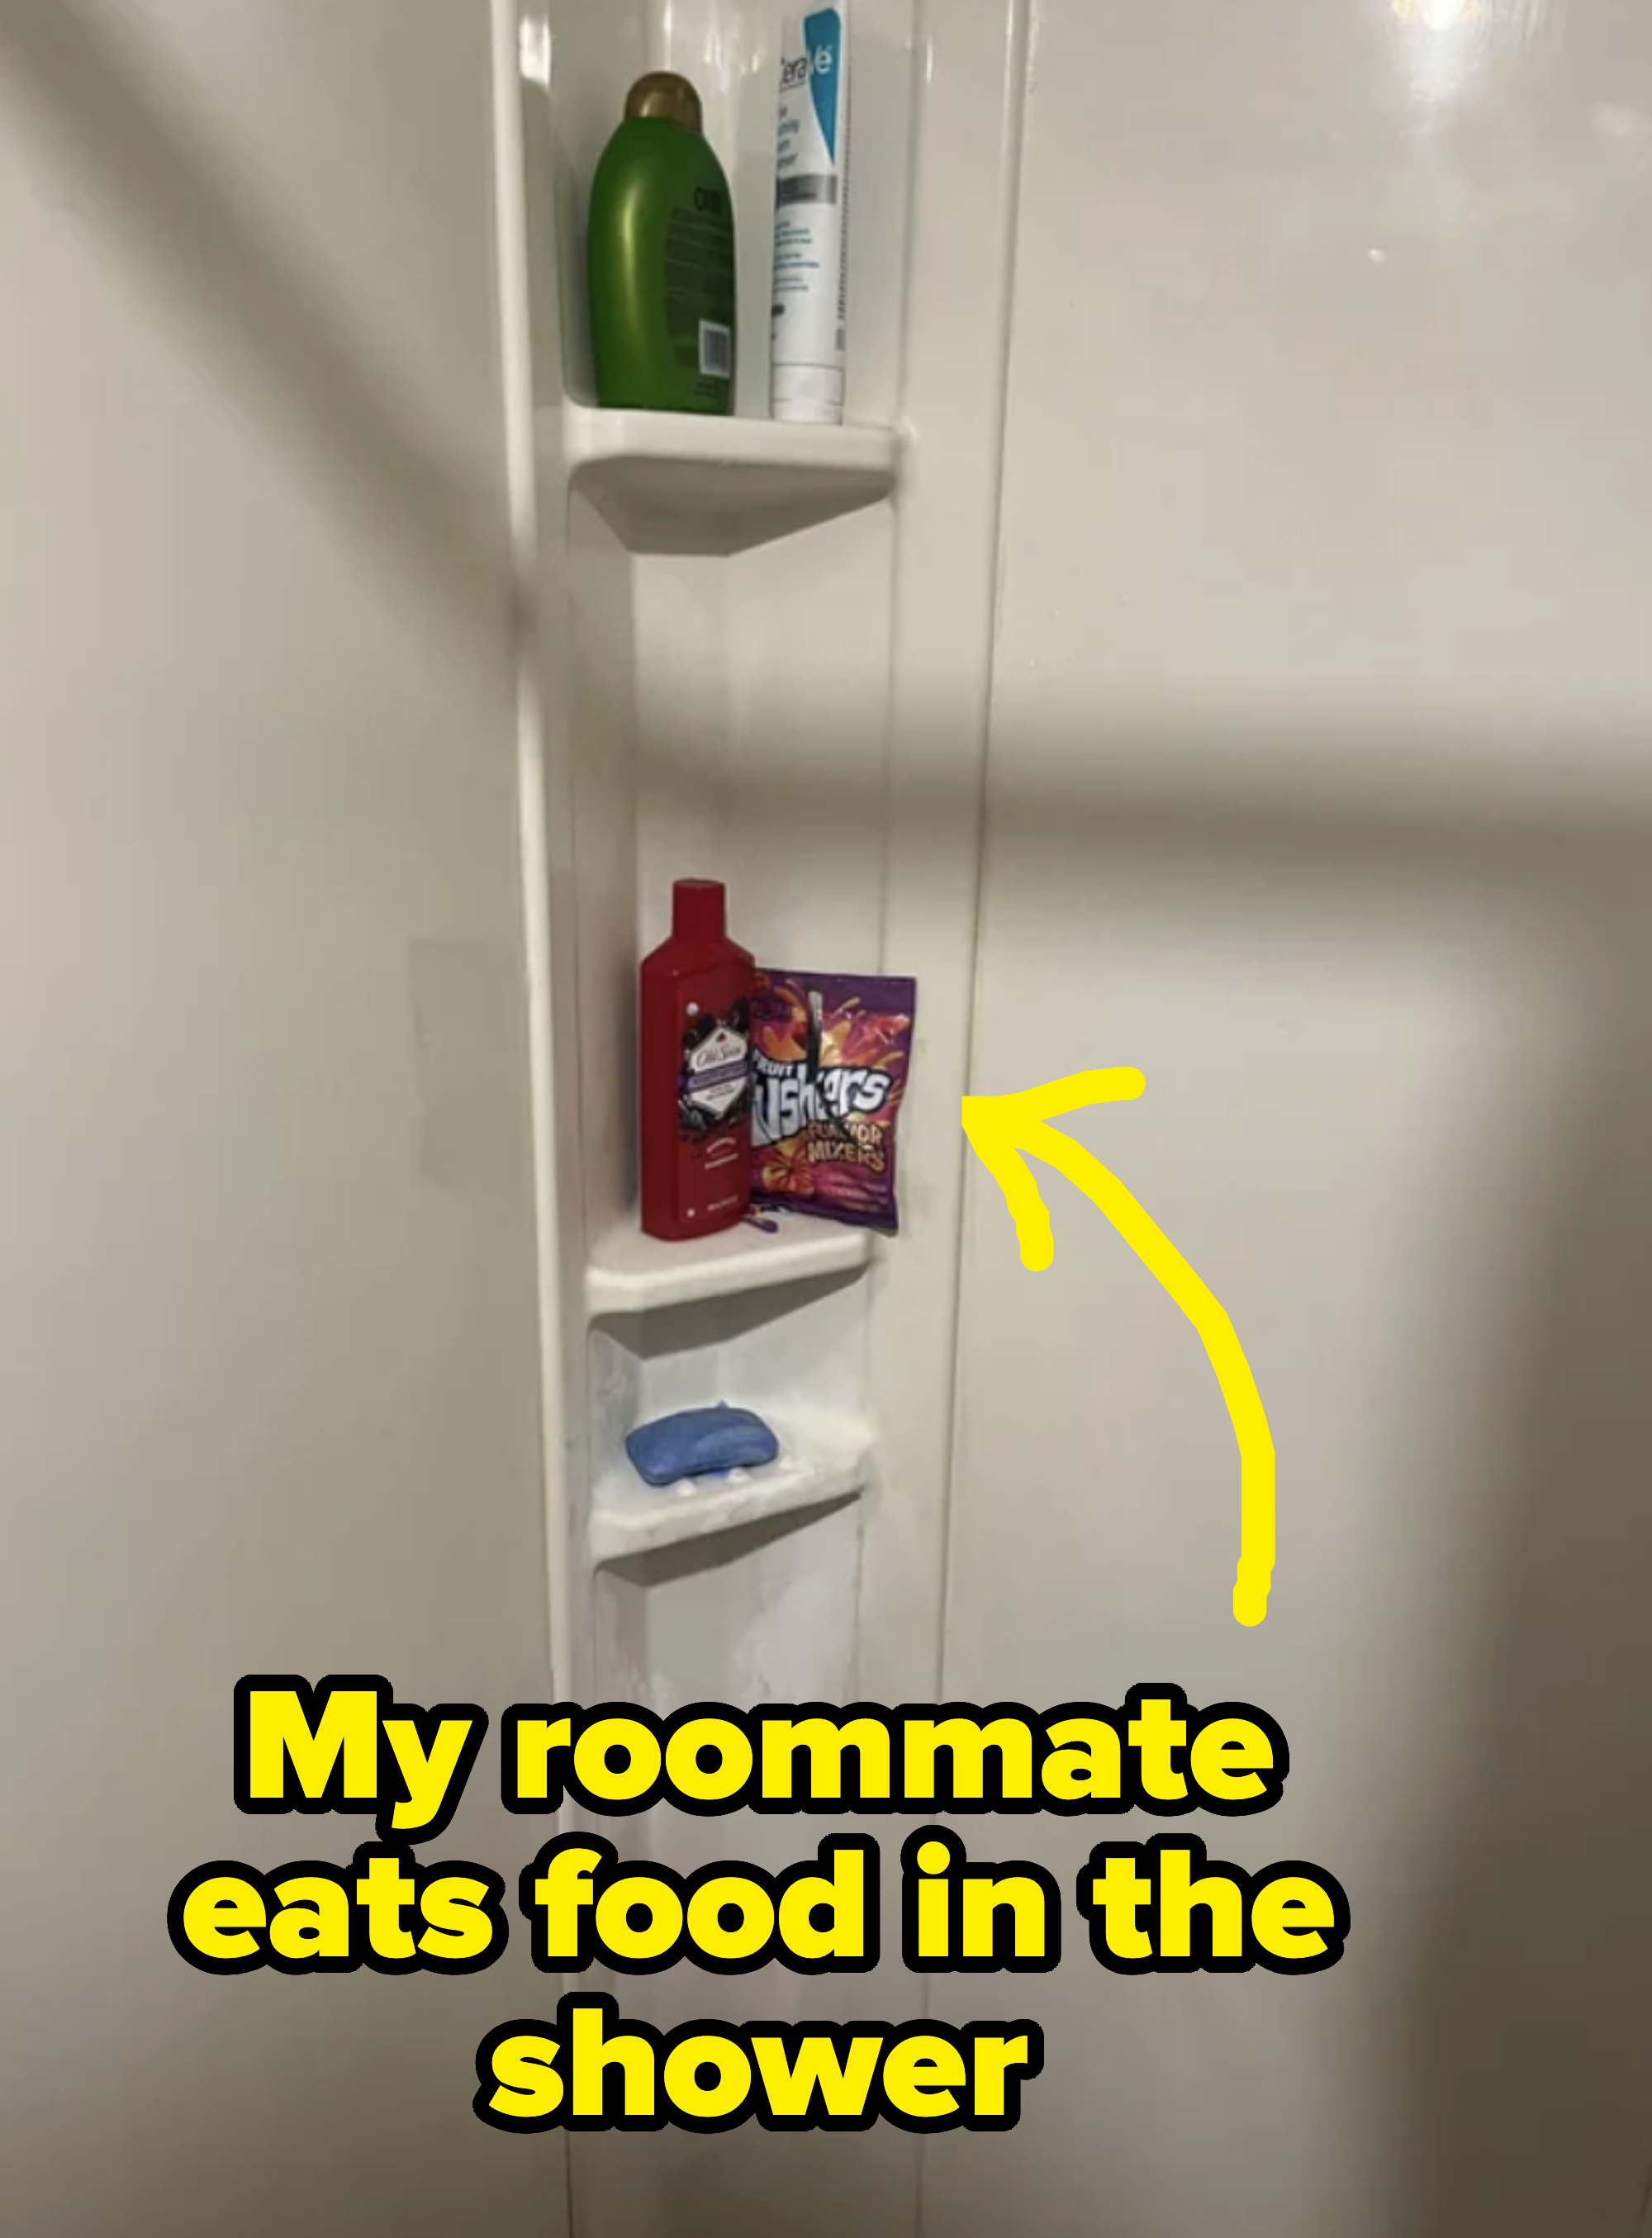 bag of chips in the shower